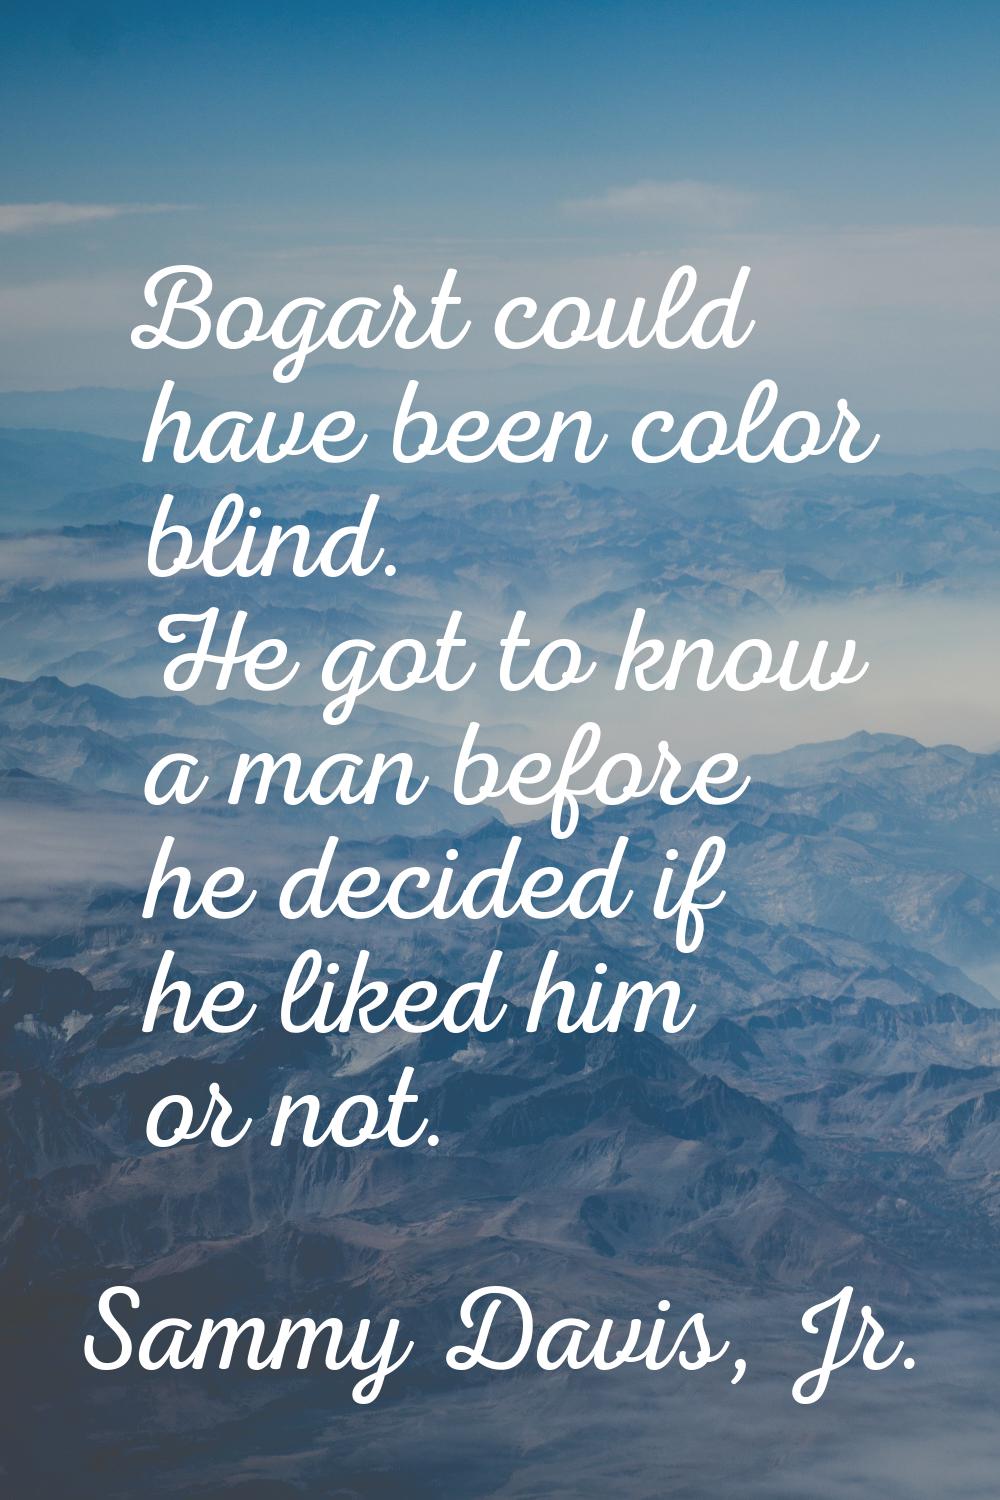 Bogart could have been color blind. He got to know a man before he decided if he liked him or not.